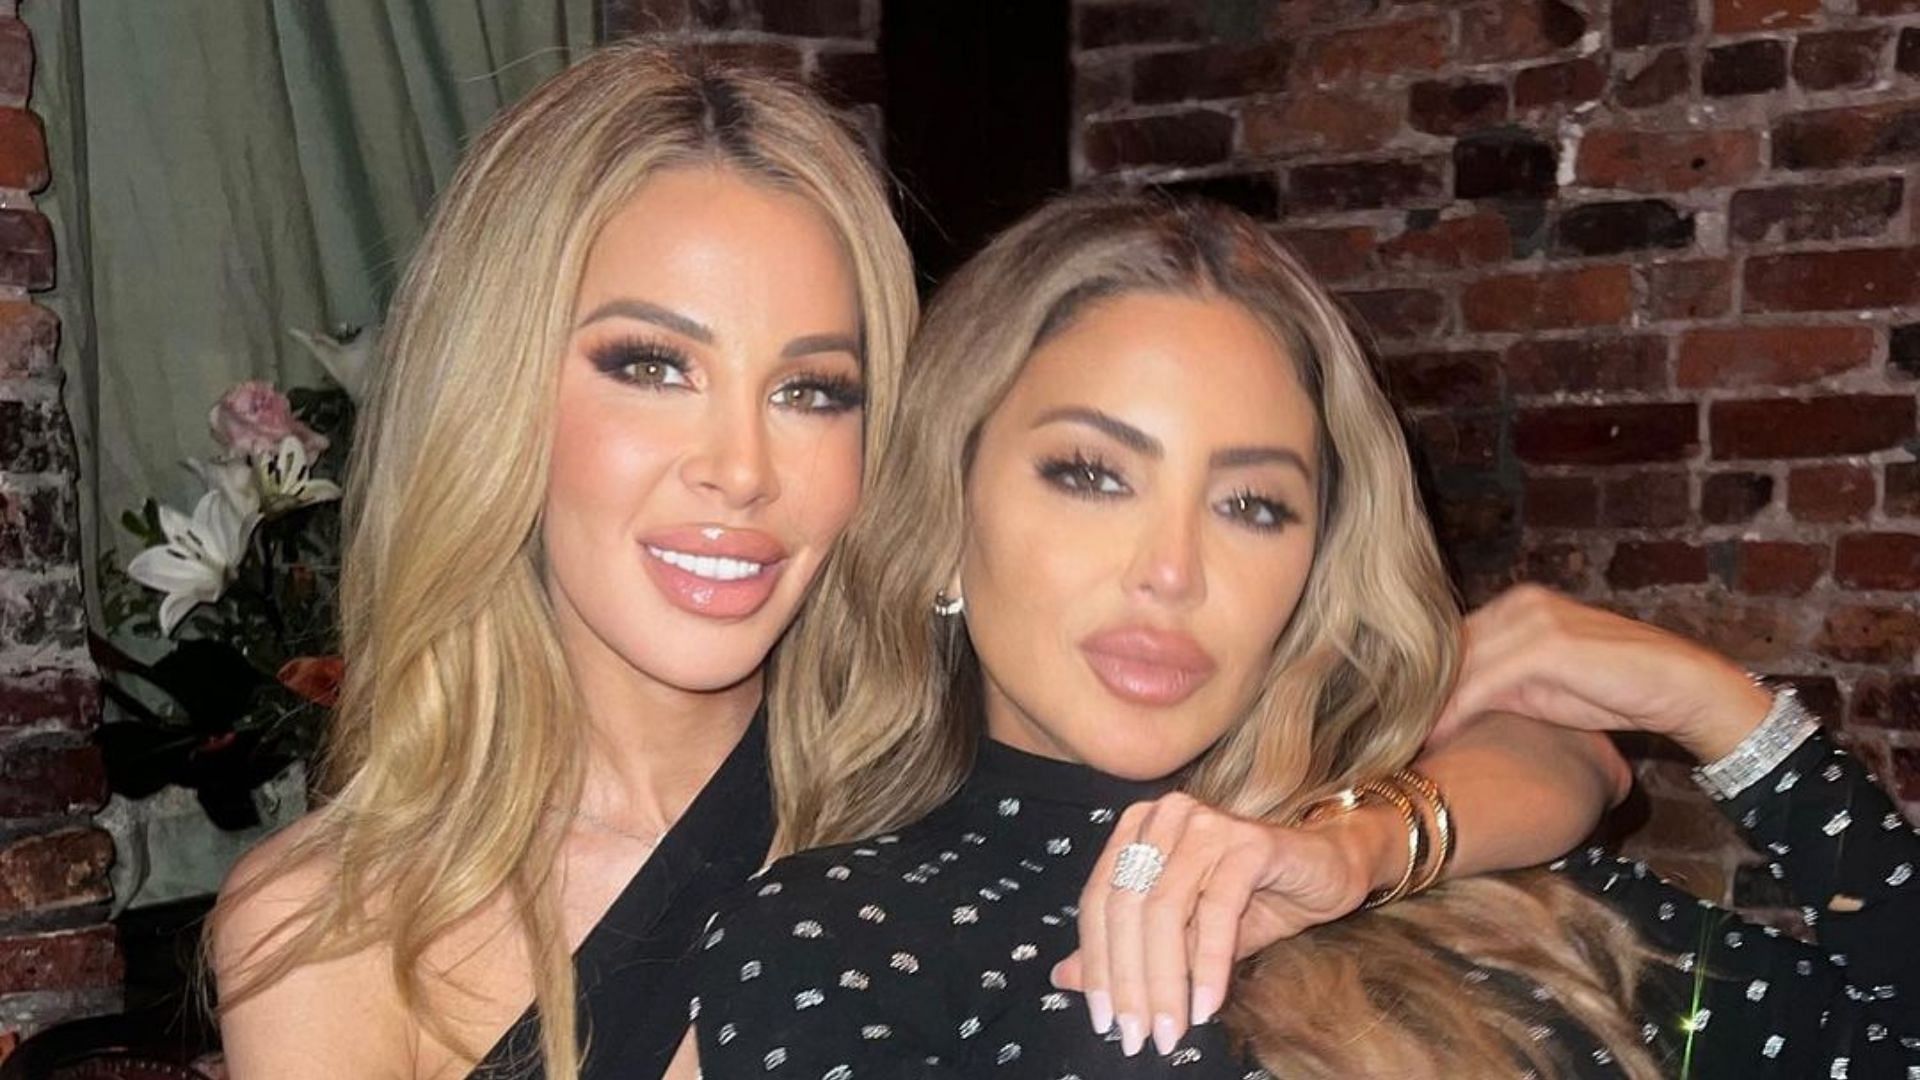 What happened between Lisa and Larsa? Fans left with mixed opinions